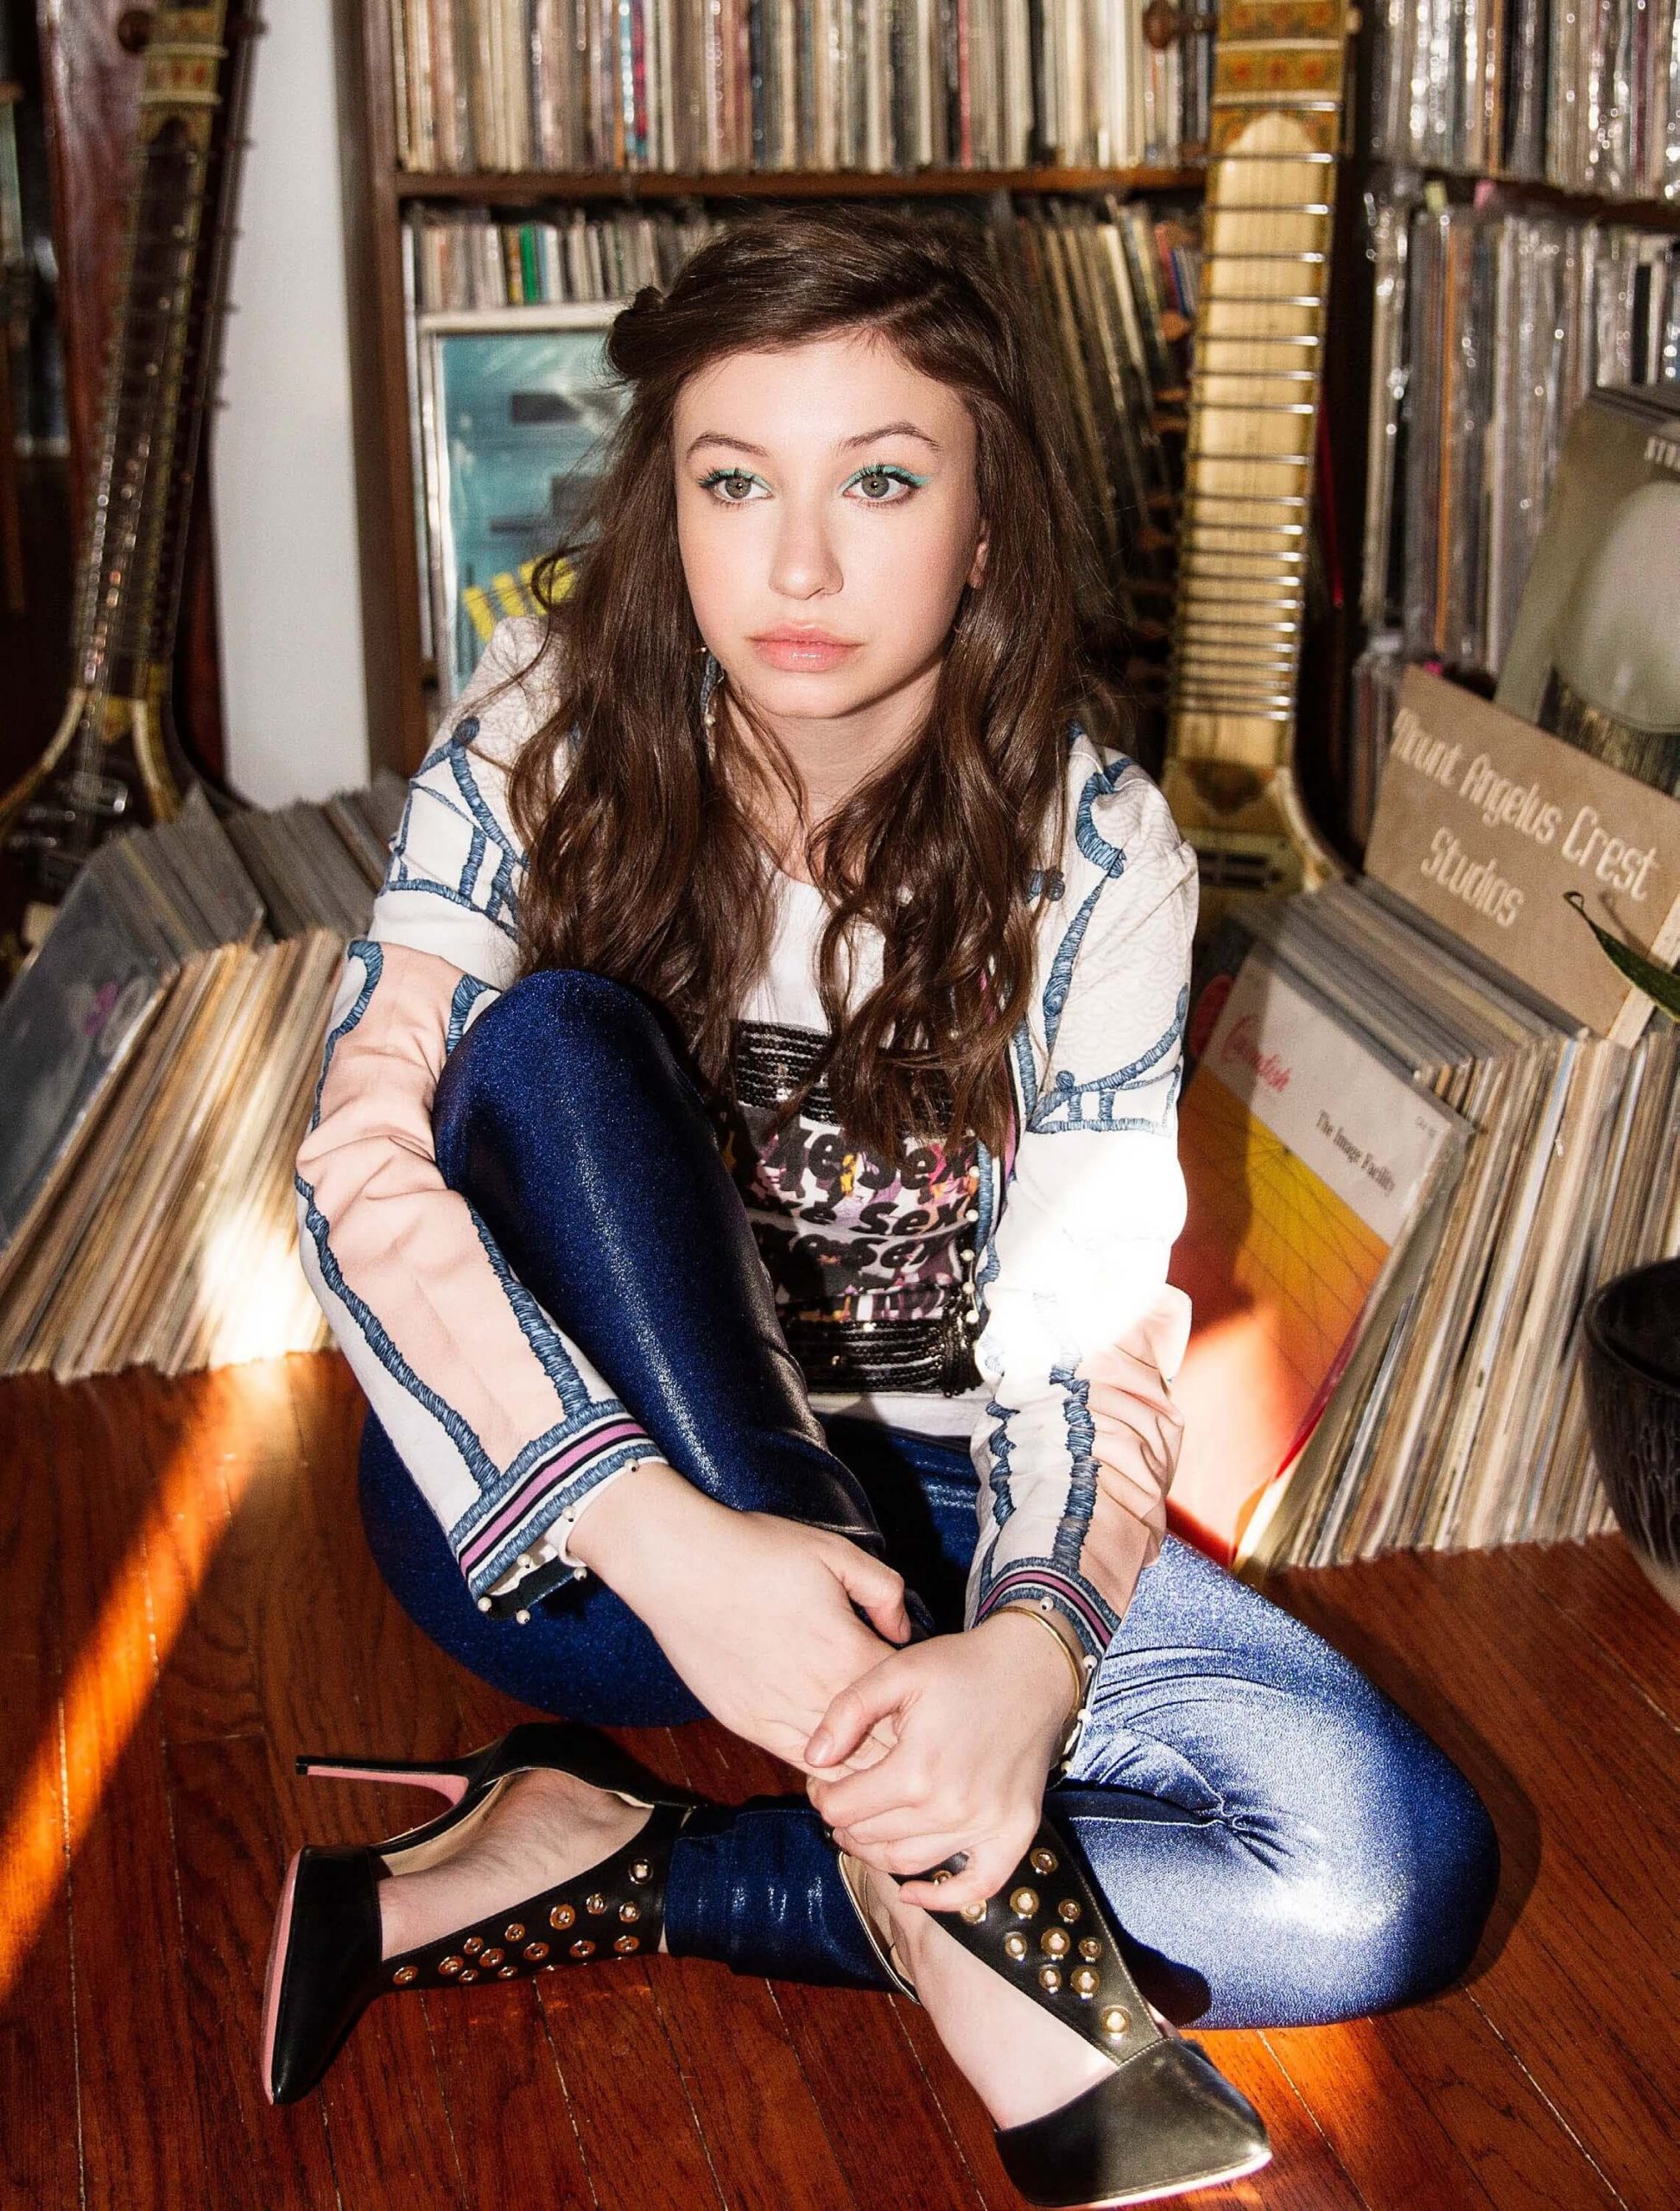 50 Katelyn Nacon Nude Pictures Which Prove Beauty Beyond Recognition 59